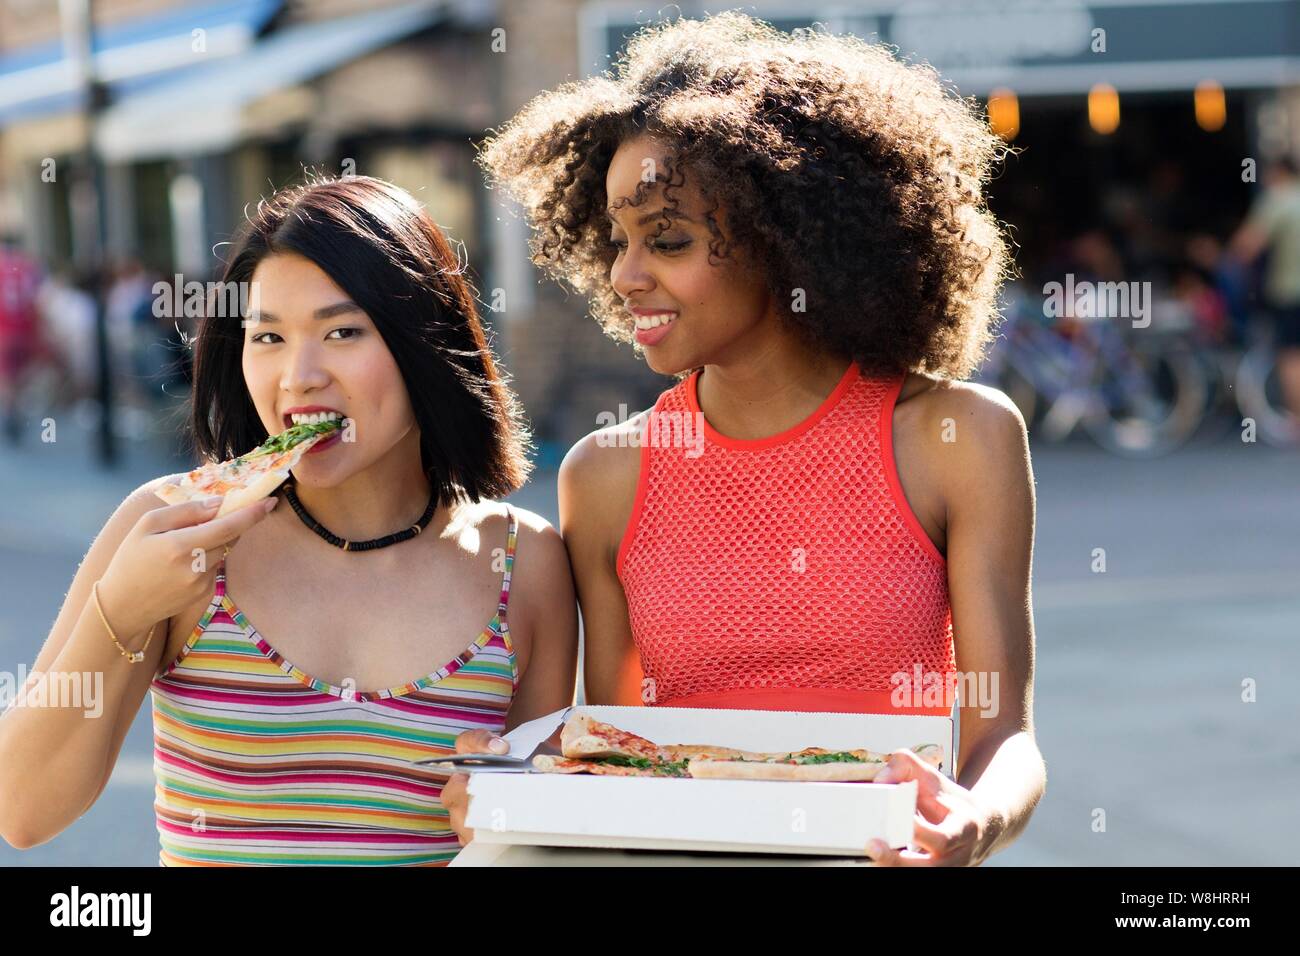 Two young women eating pizza from box outdoors. Stock Photo